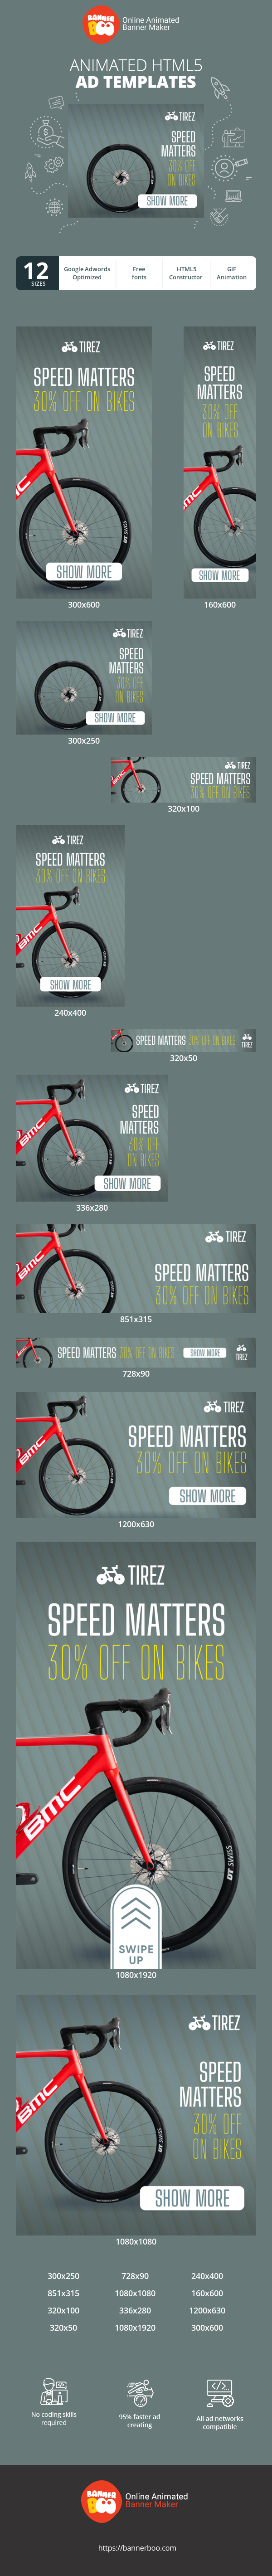 Banner ad template — Speed Matters — 30% Off On Bikes